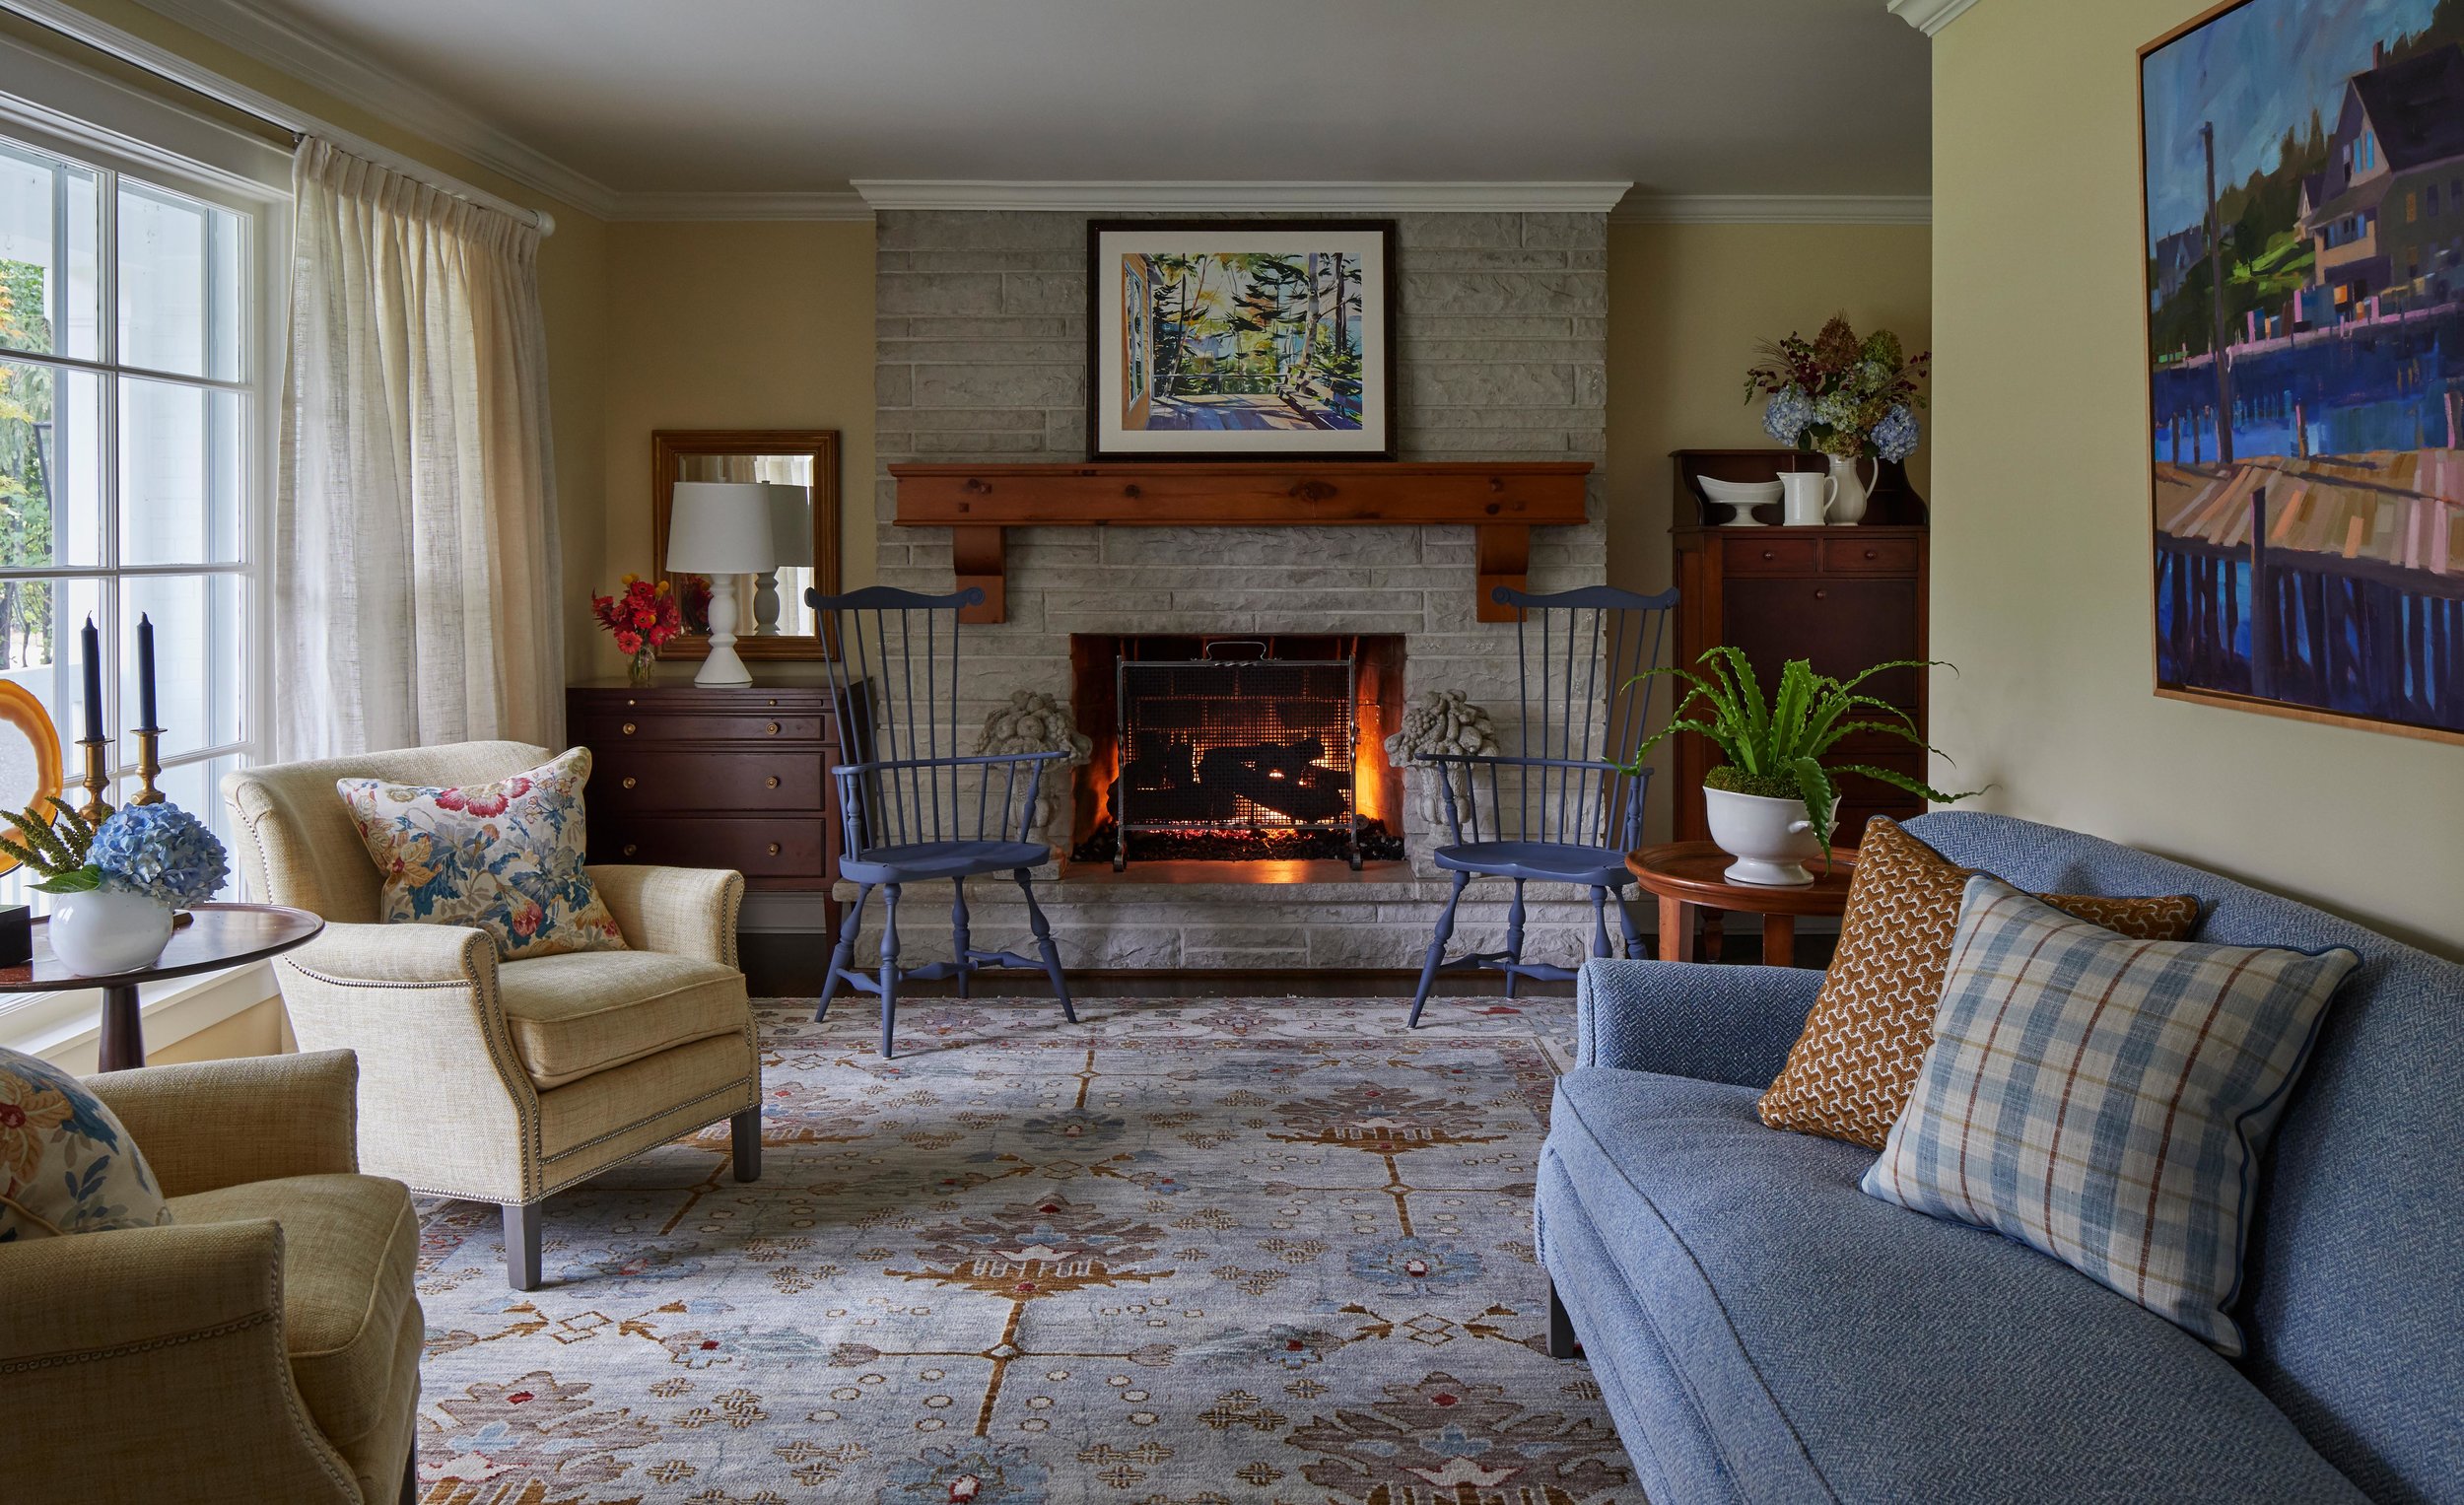 Classic living room with cozy fireplace and blue accents. Come see more interior design inspiration from Elizabeth Drake. Photo by Werner Straube. #interiordesign #classicdesign #traditionaldecor #housetour #elizabethdrake